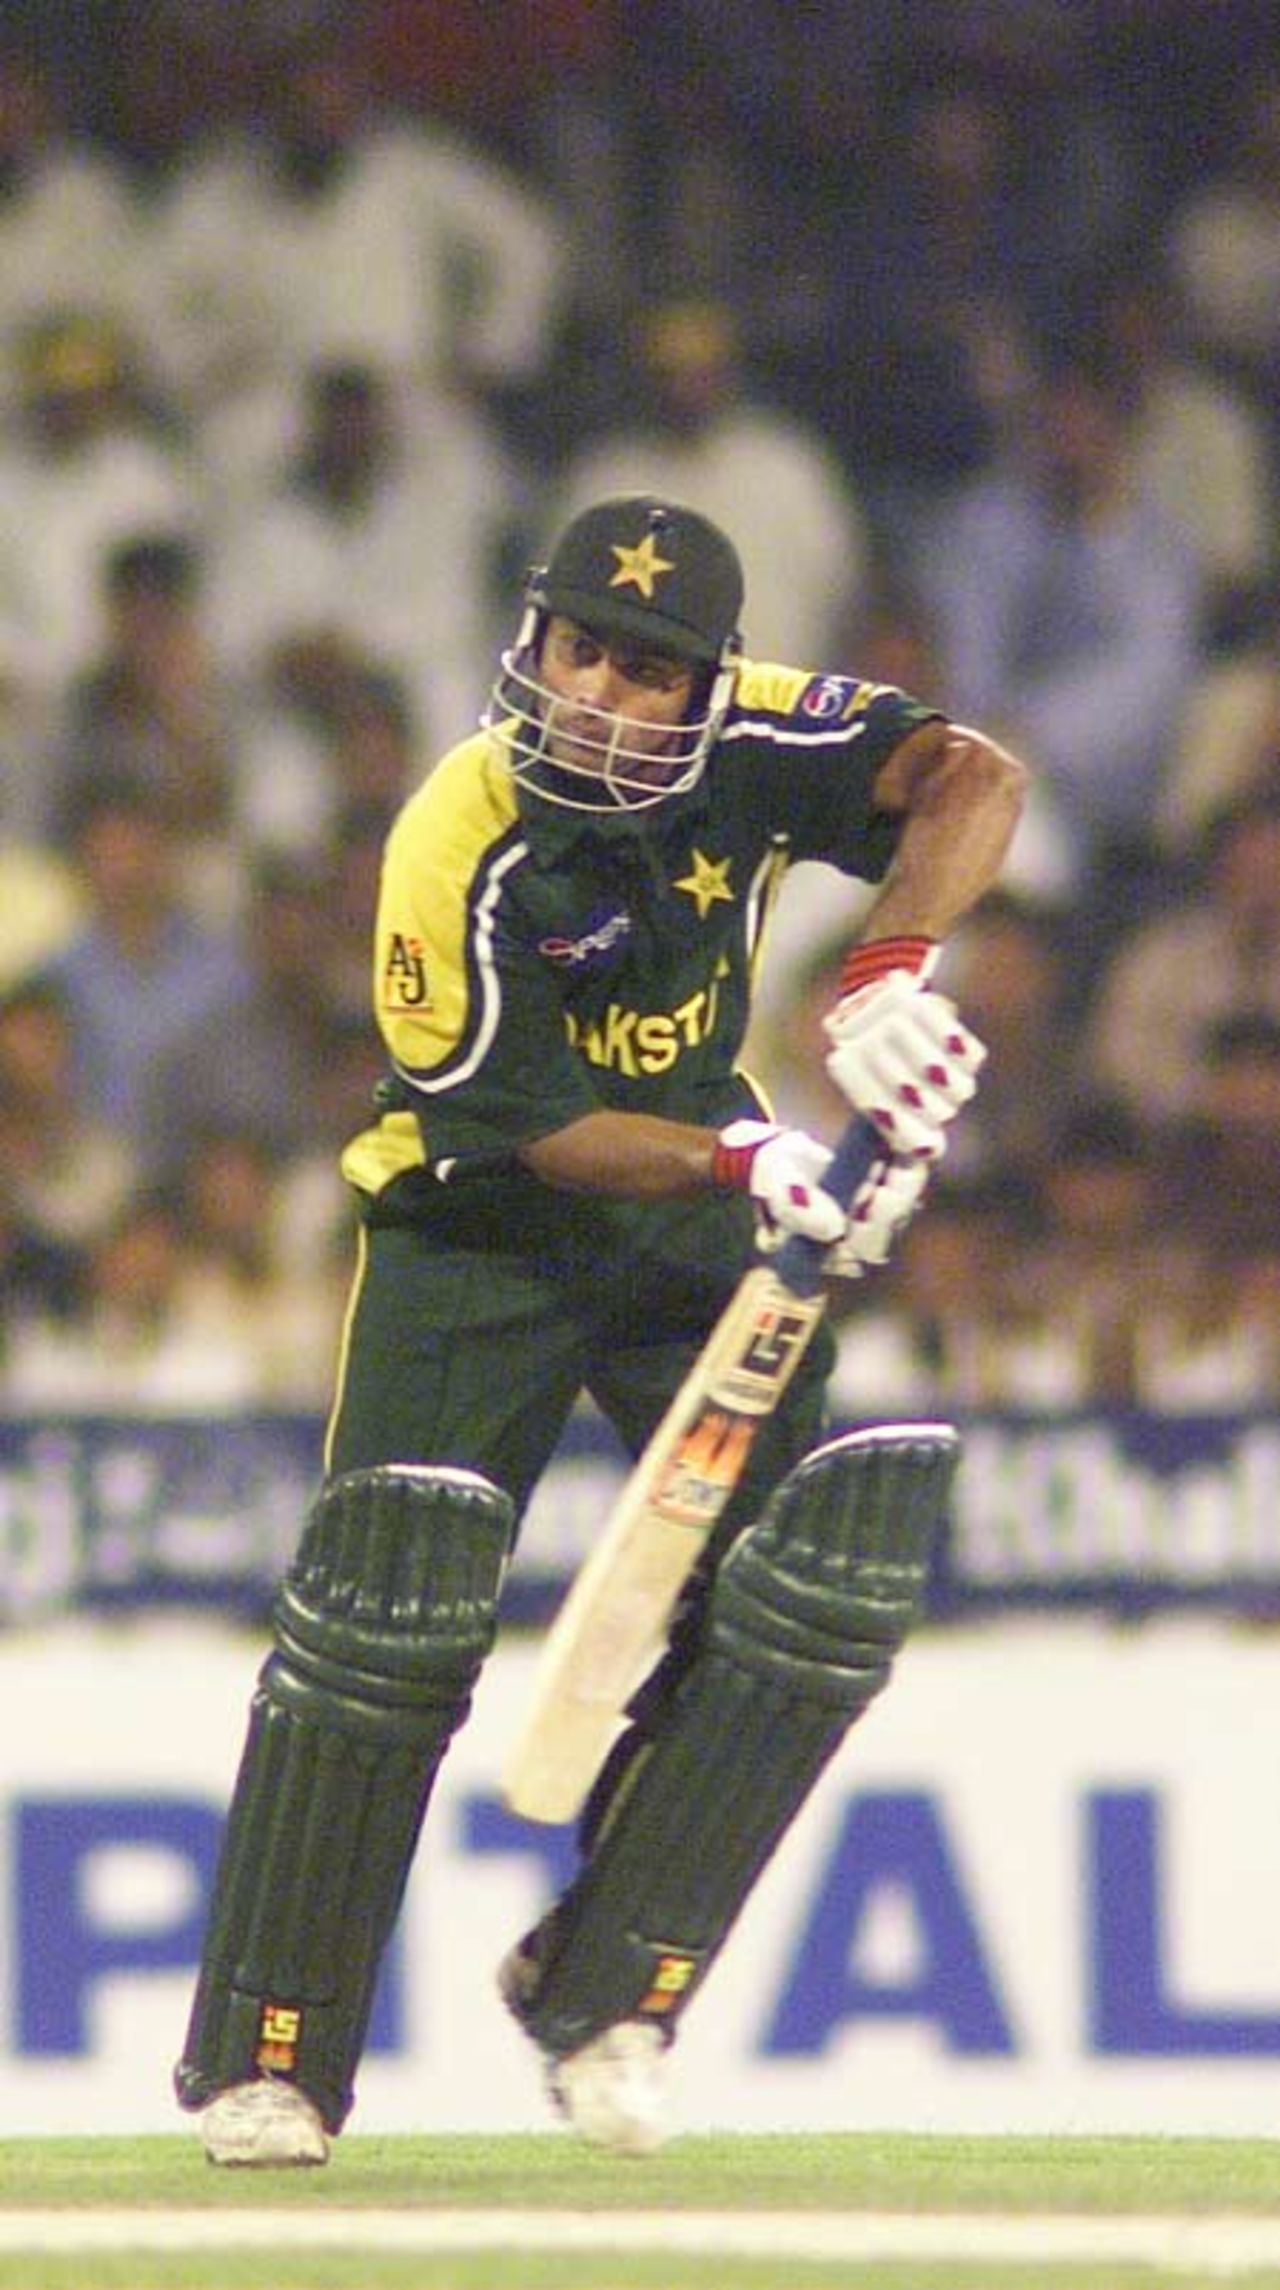 Mohammad Hafeez in action during his 50 run innings, 2nd Match: Pakistan v Sri Lanka, Cherry Blossom Sharjah Cup, 4 Apr 2003